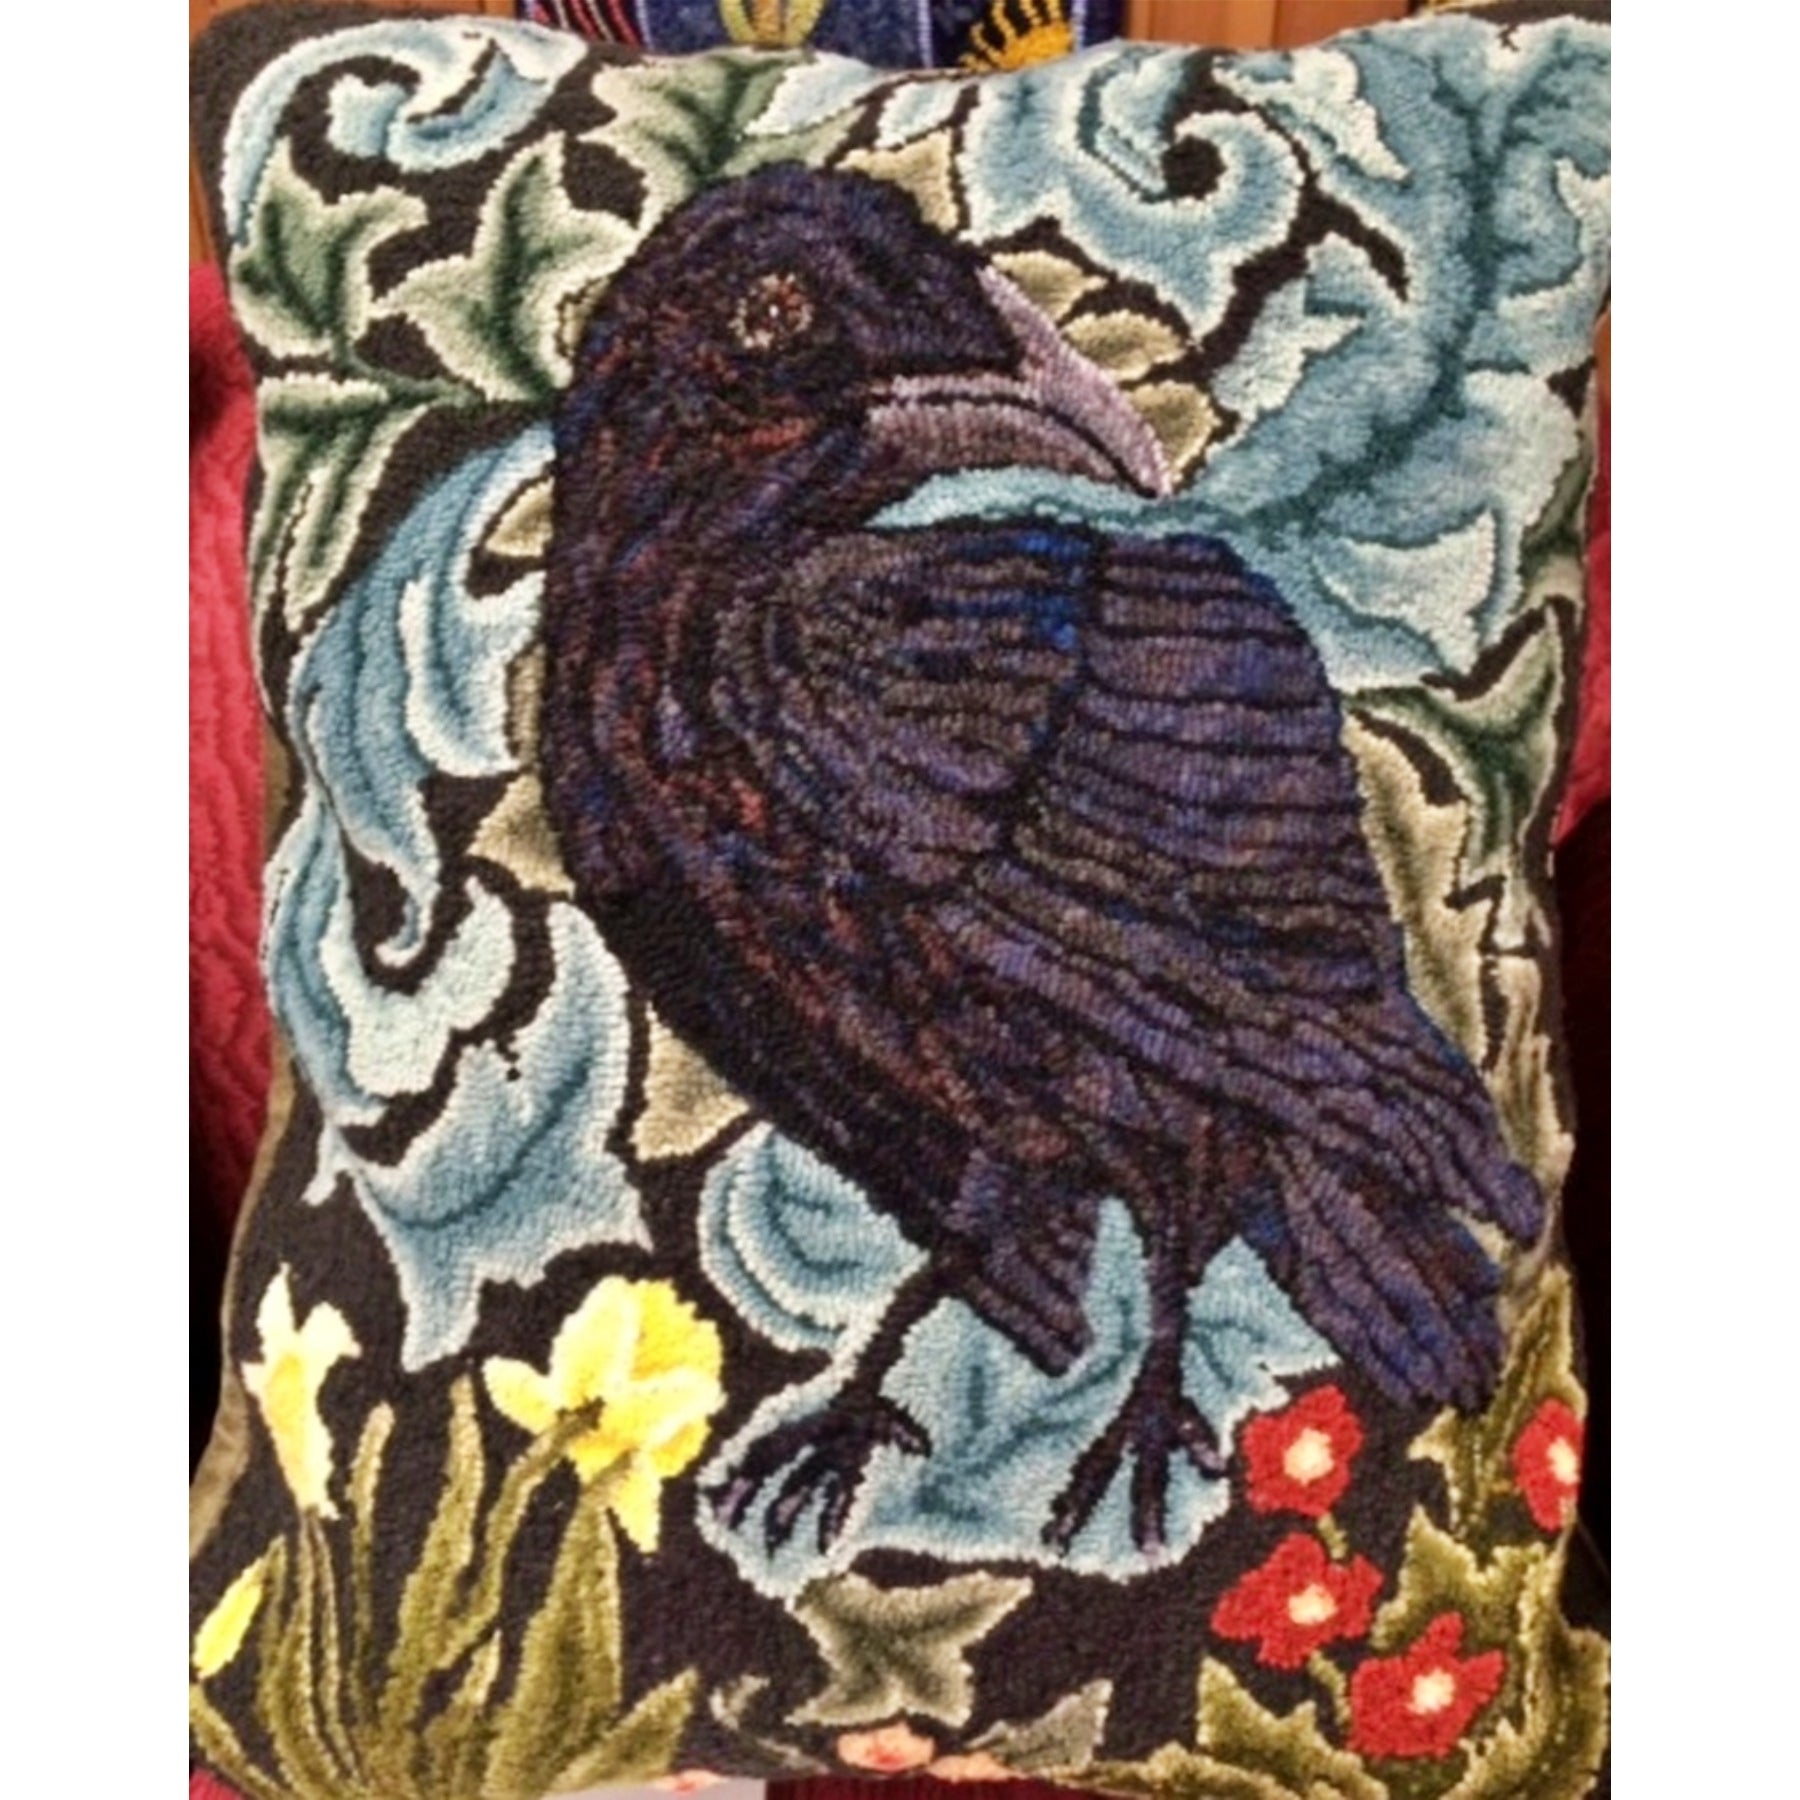 Forest Raven, rug hooked by Sheila Stewart